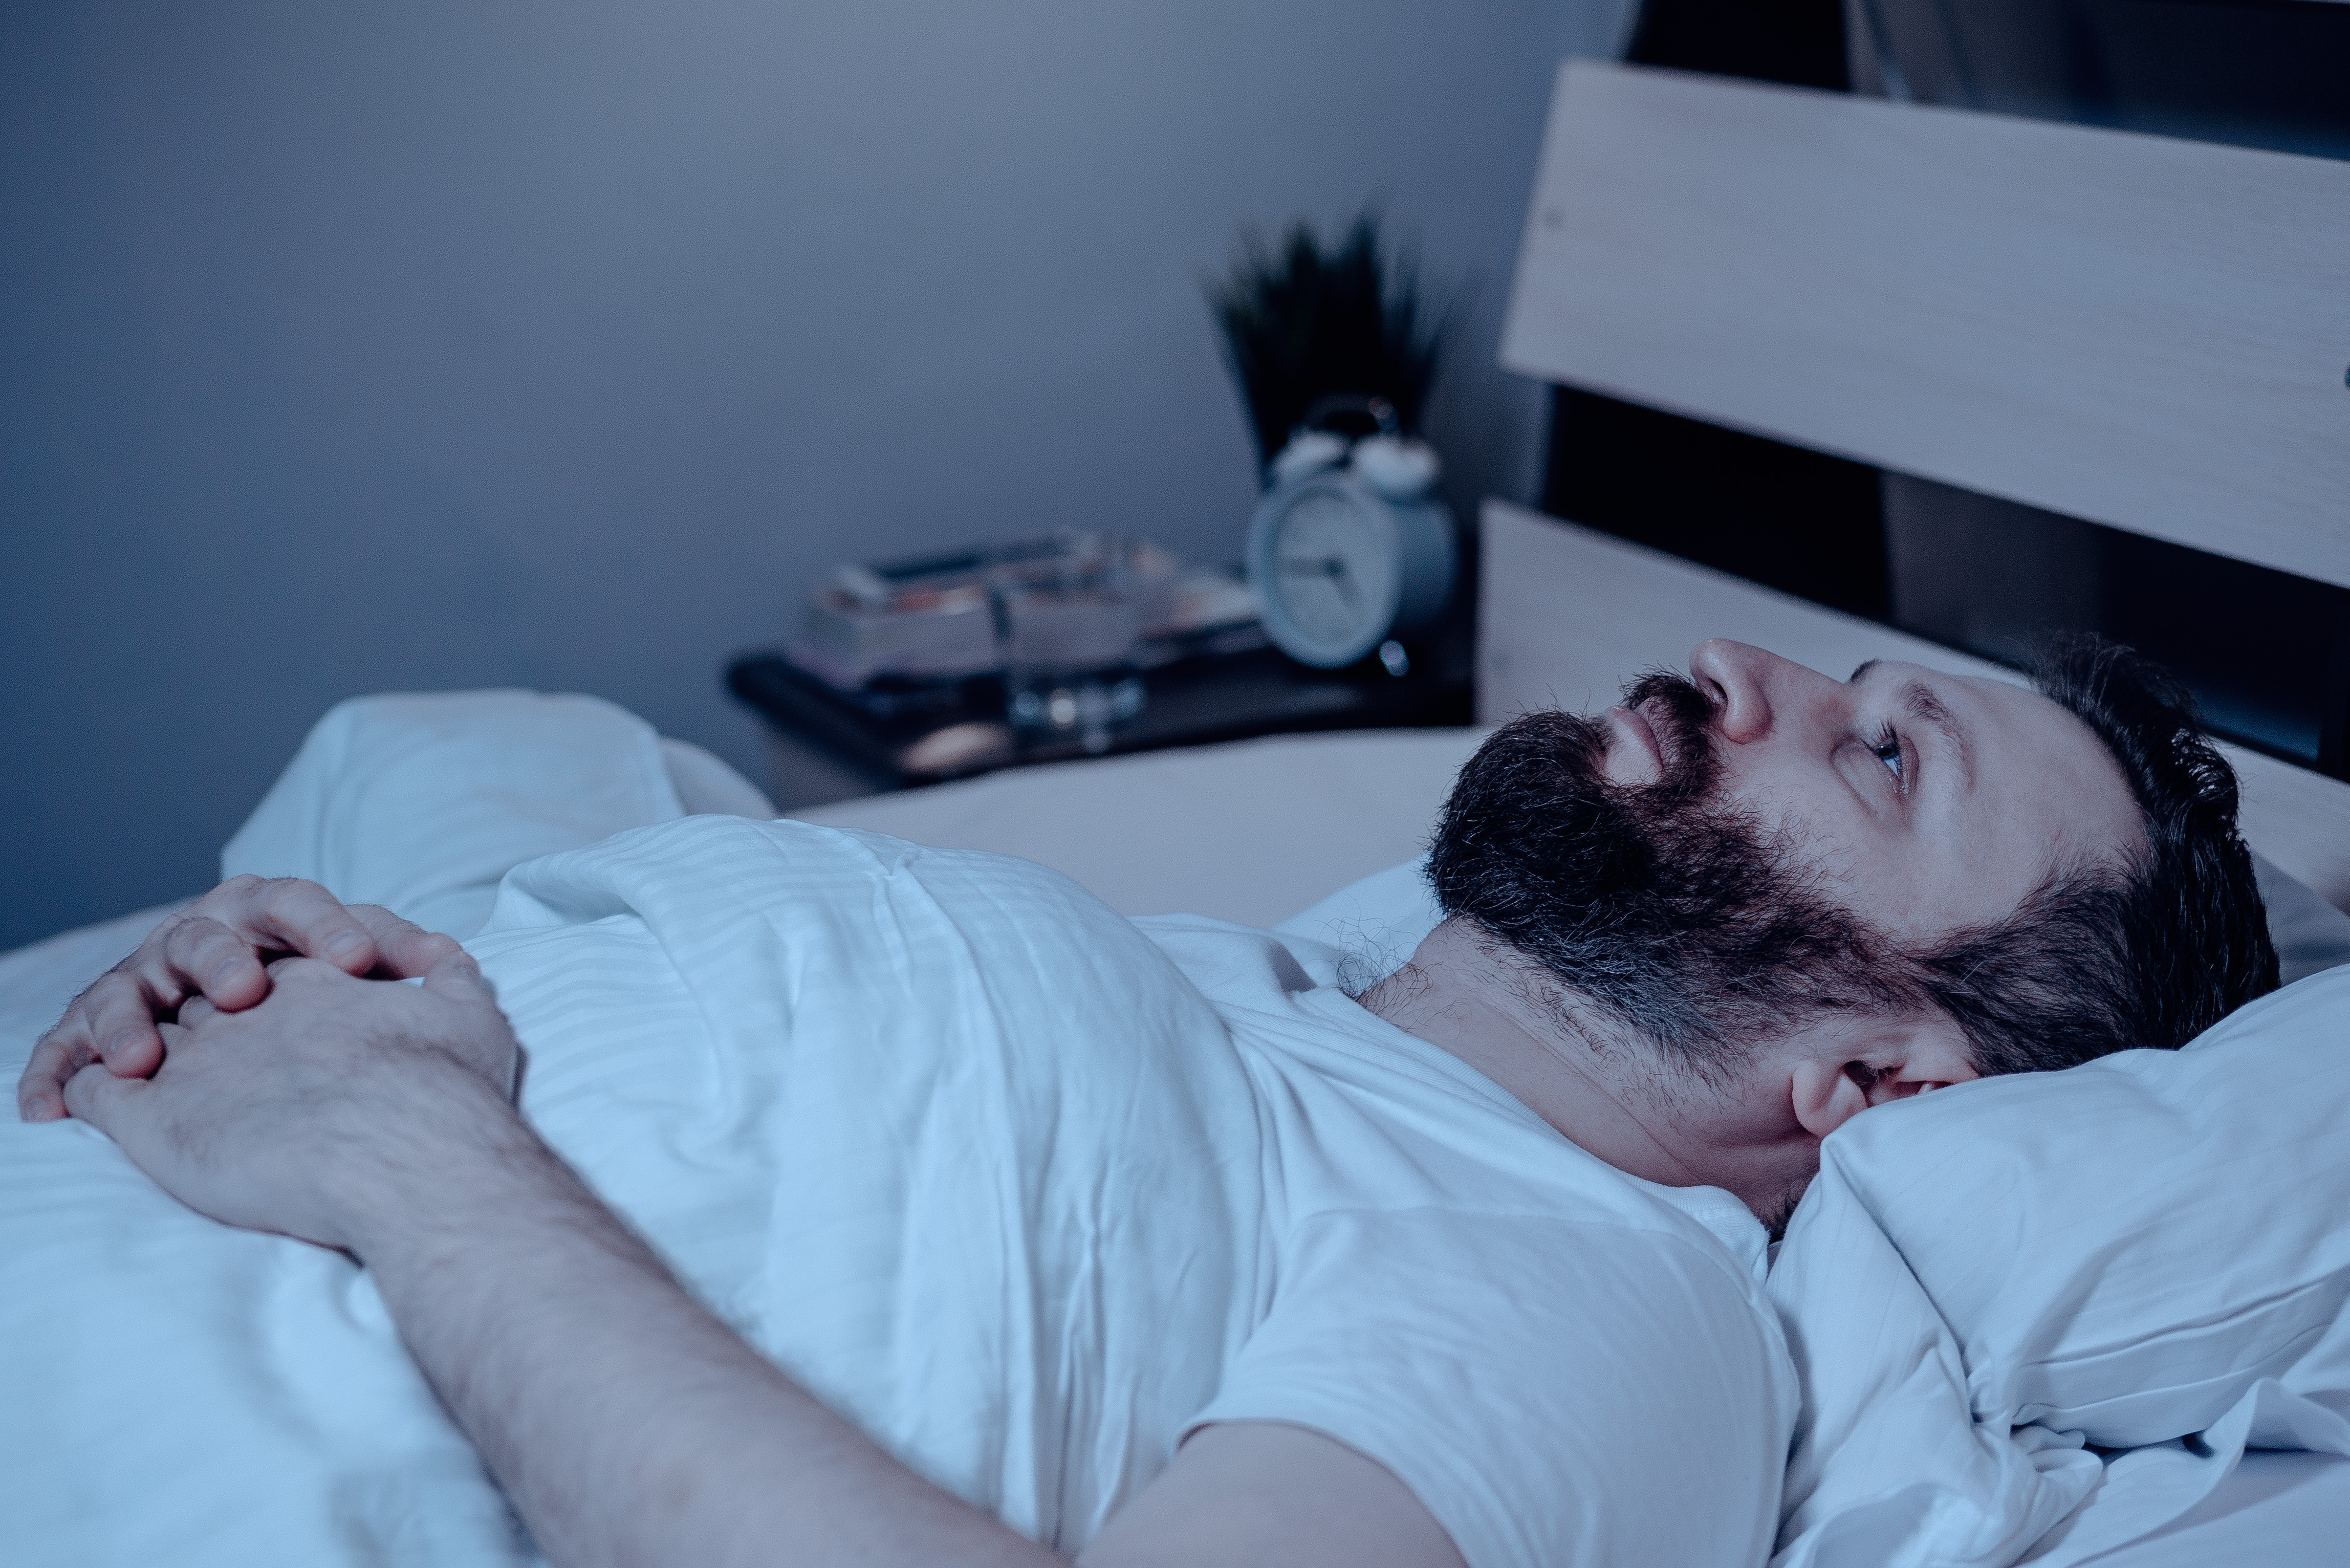 A bearded man in bed at night cannot sleep, is unhappy and very tired. | Source: Shutterstock